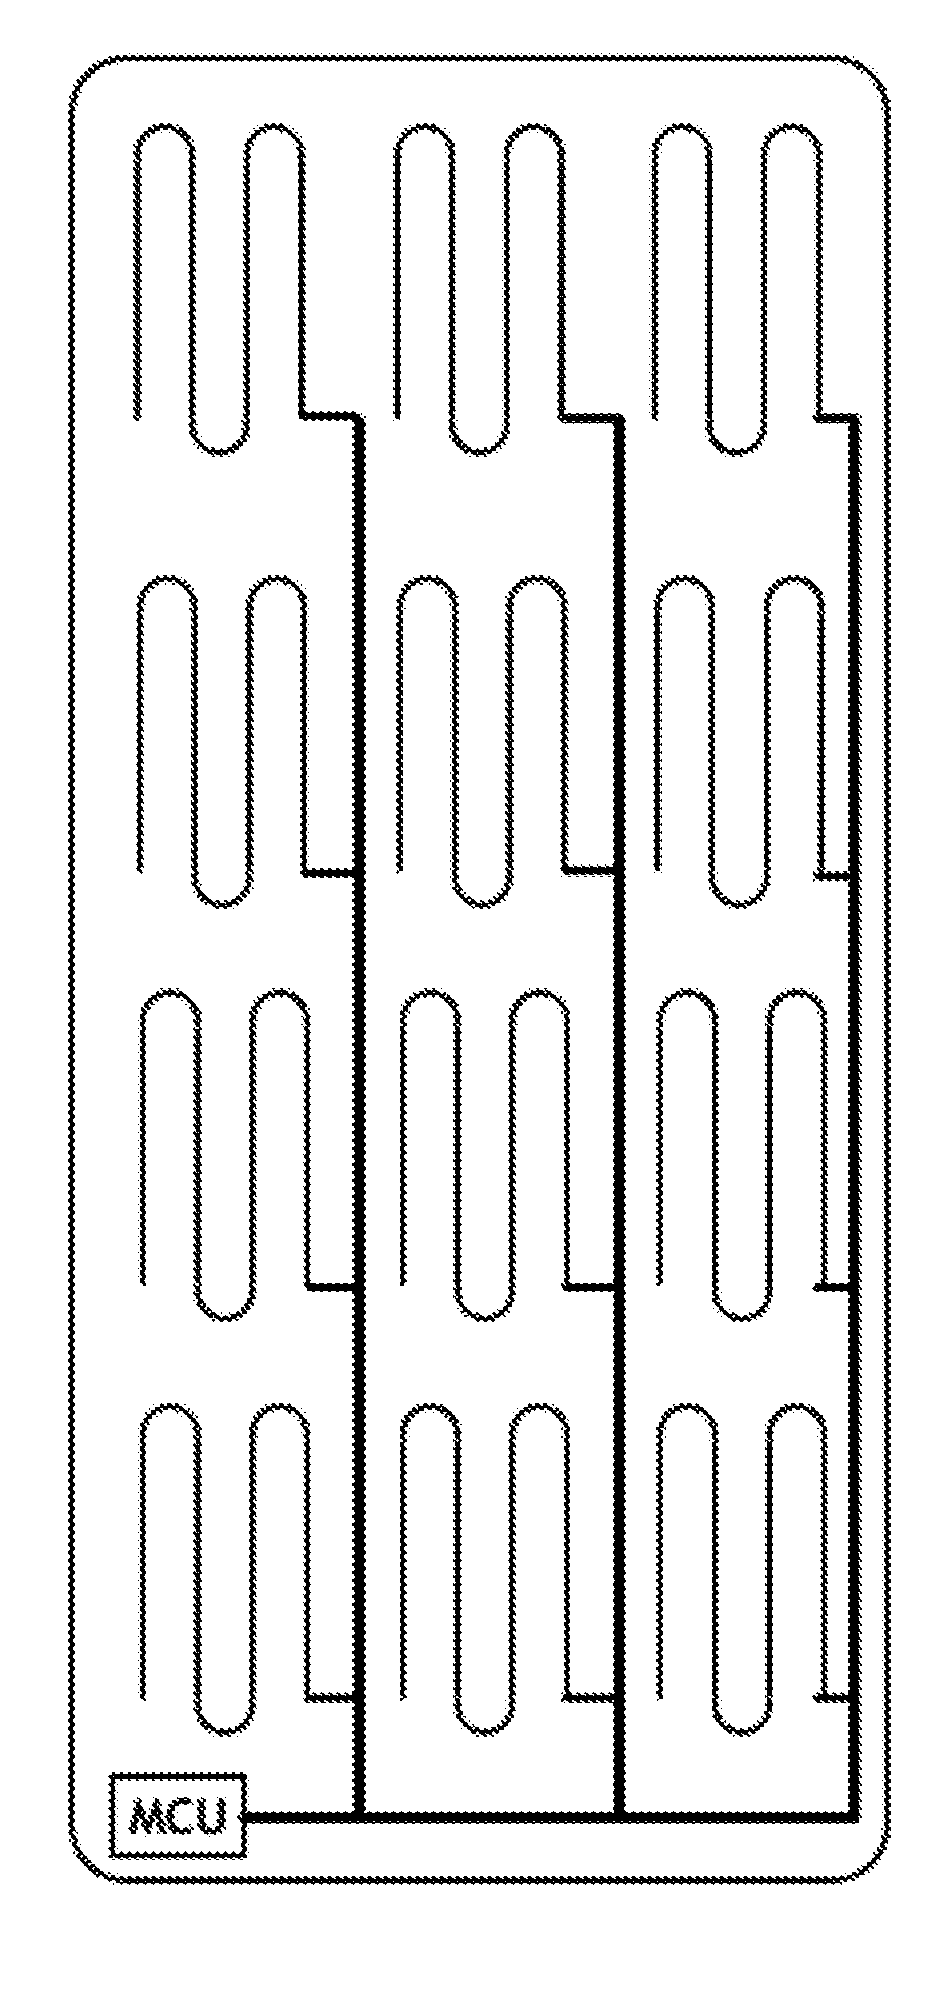 A System And Method For Monitoring A Person Via An Analog Multi-Zone Pressure Sensitive Pad